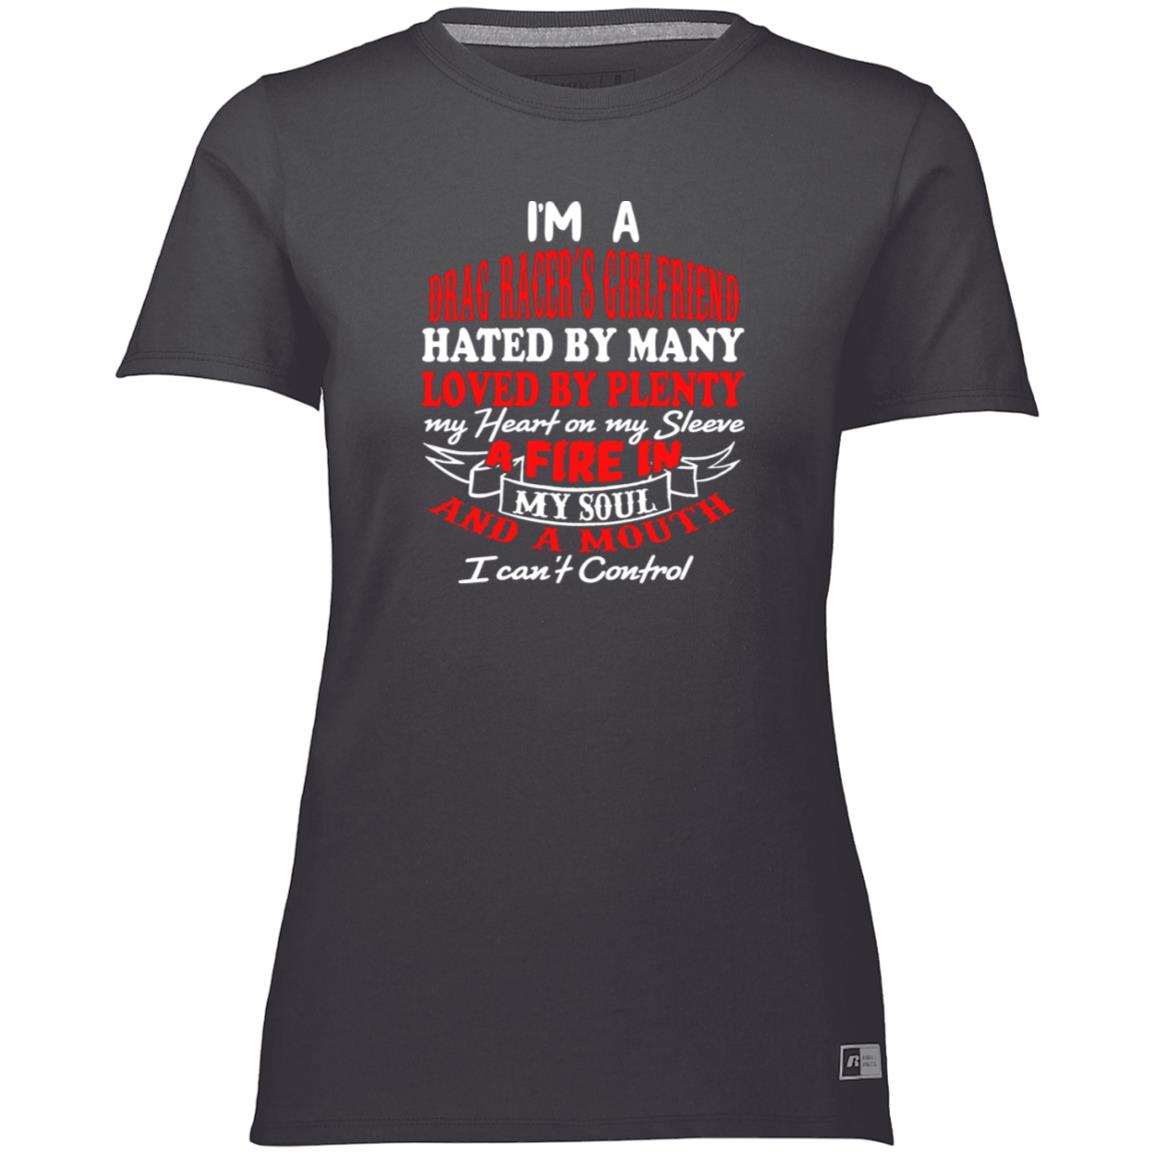 I'm A Drag Racer's Girlfriend Hated By Many Loved By Plenty Ladies’ Essential Dri-Power Tee